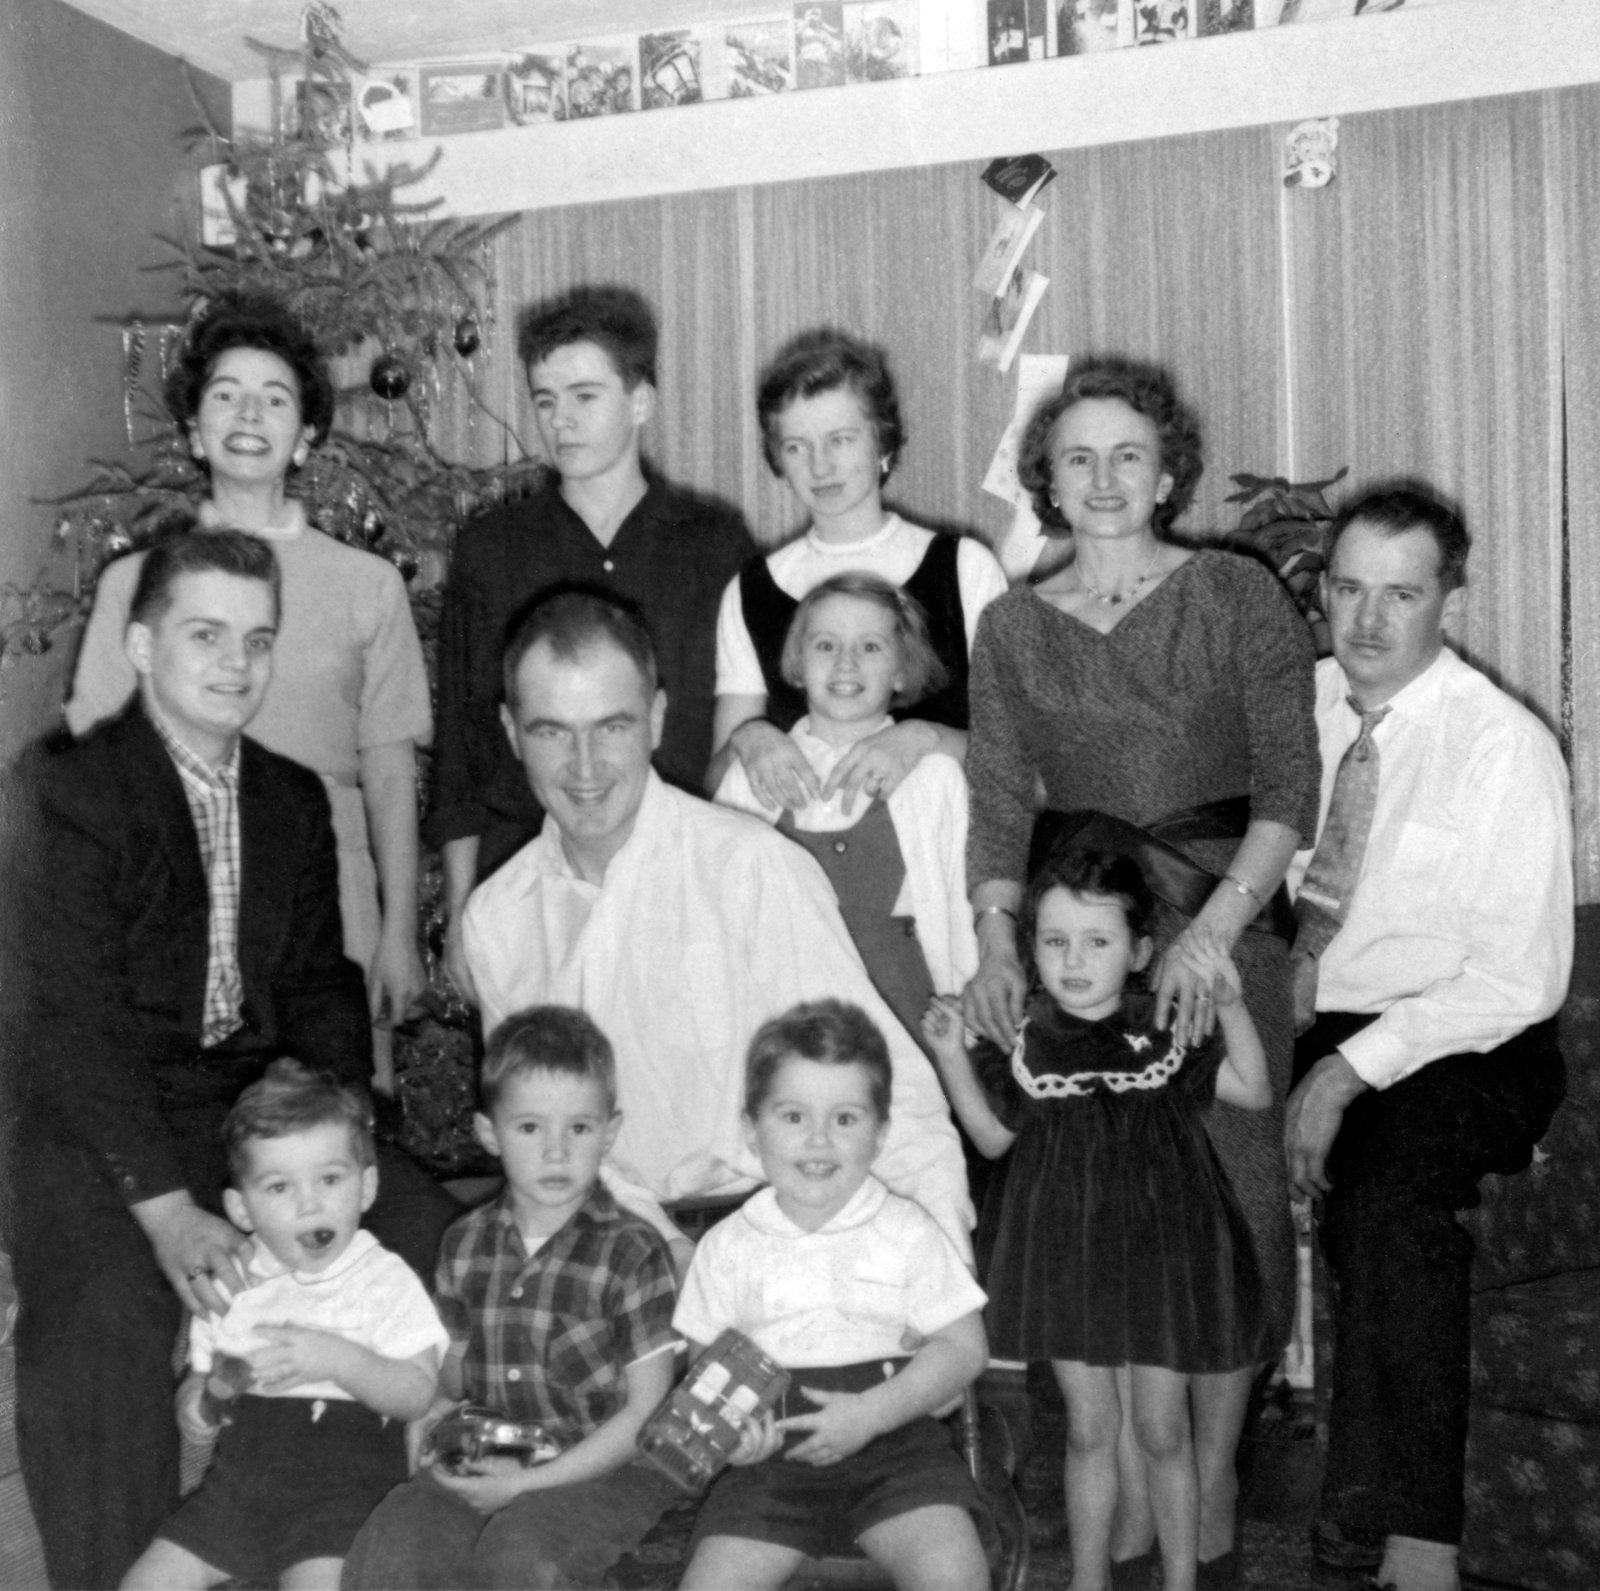 O'Donovans with family friends, the Crams, Christmas Day, December 1956.